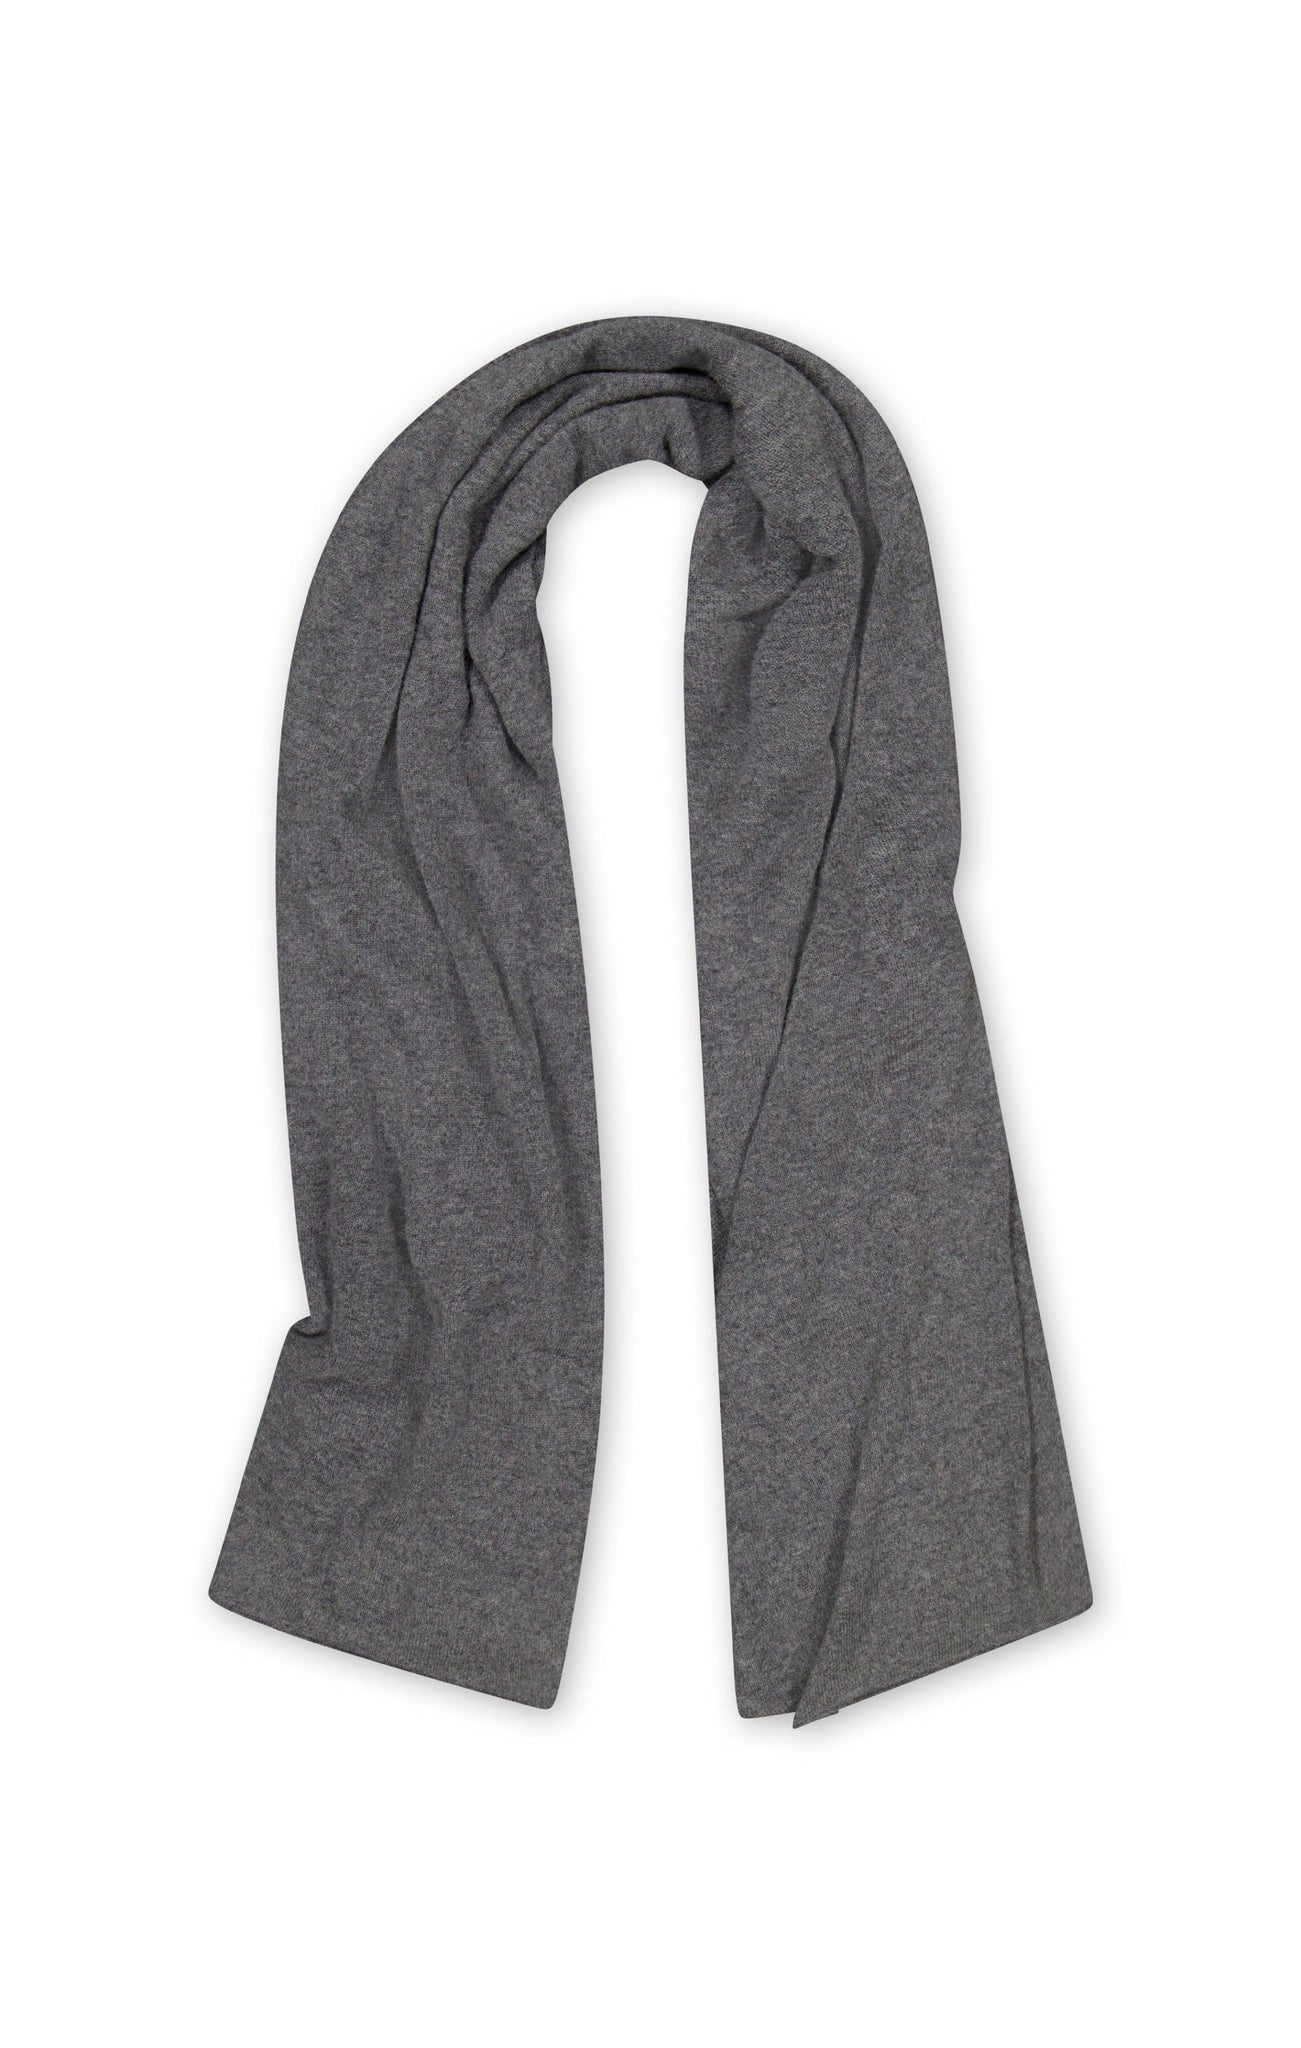 Cashmere Wear Anywhere Wrap - Skin and Threads